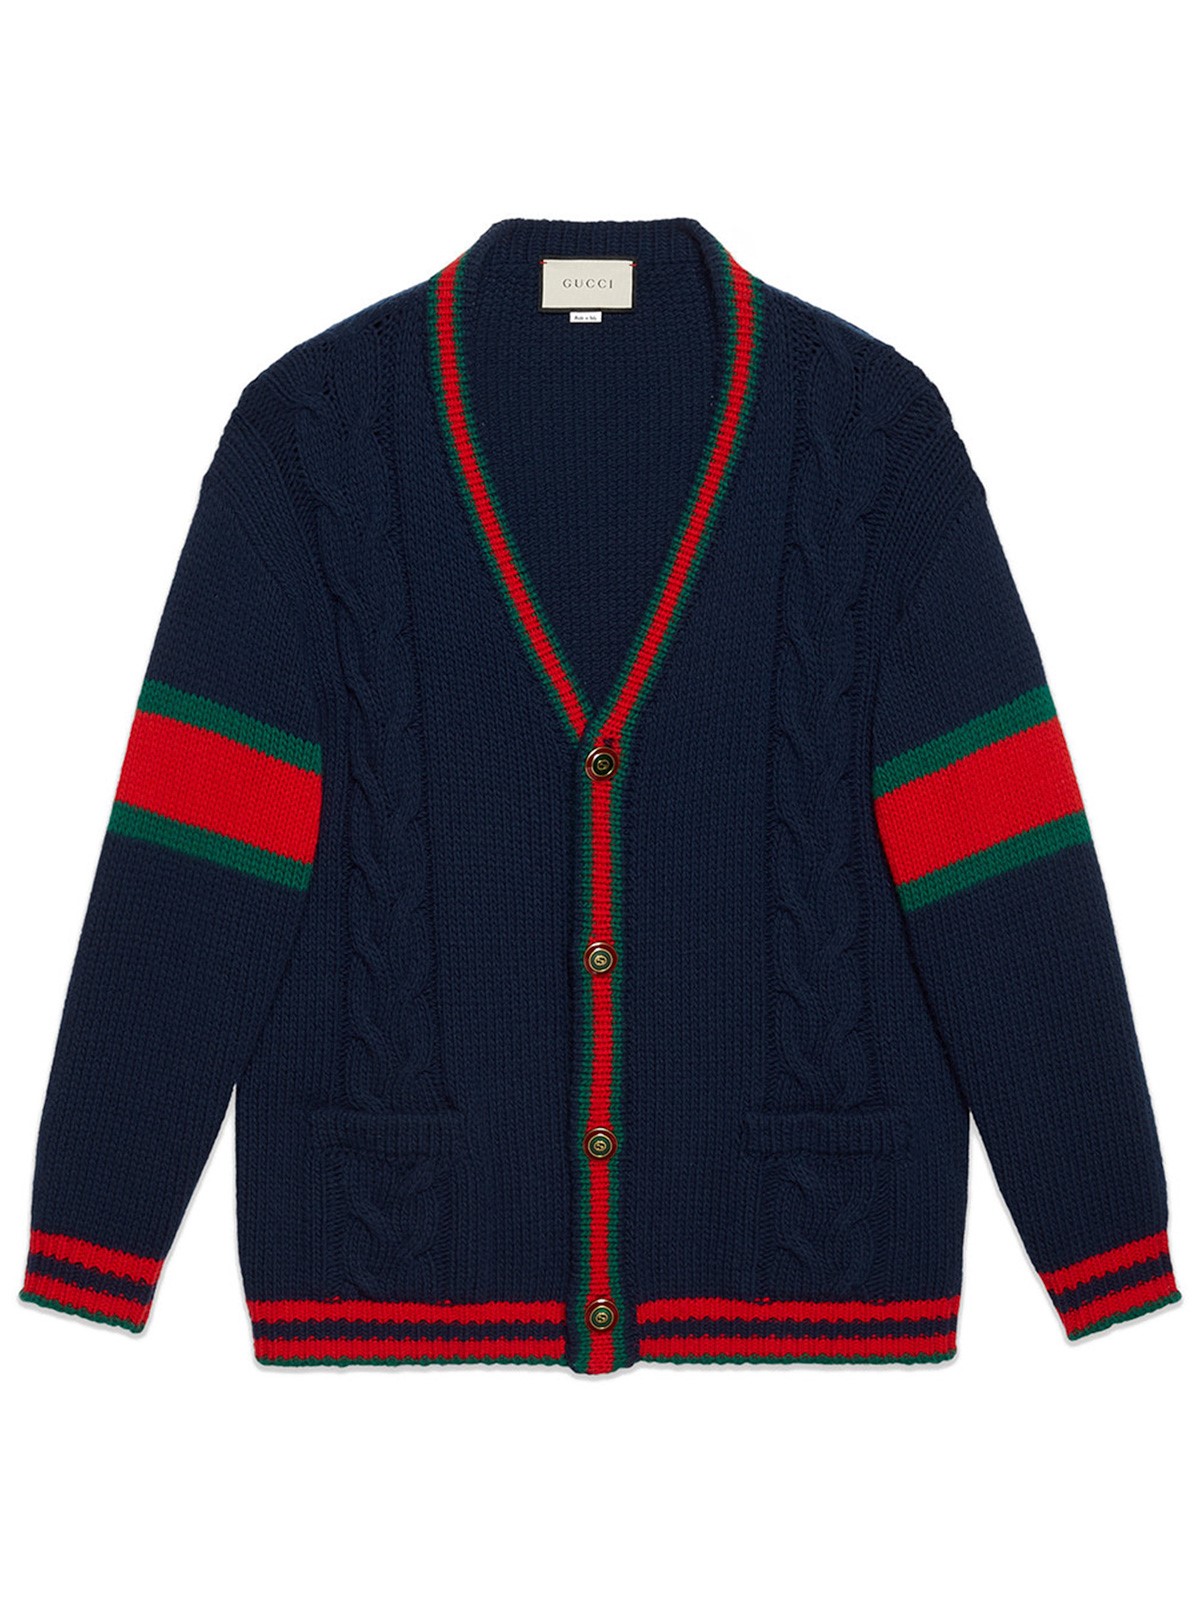 gucci WEB STRIPE CARDIGAN available on montiboutique.com - 22861